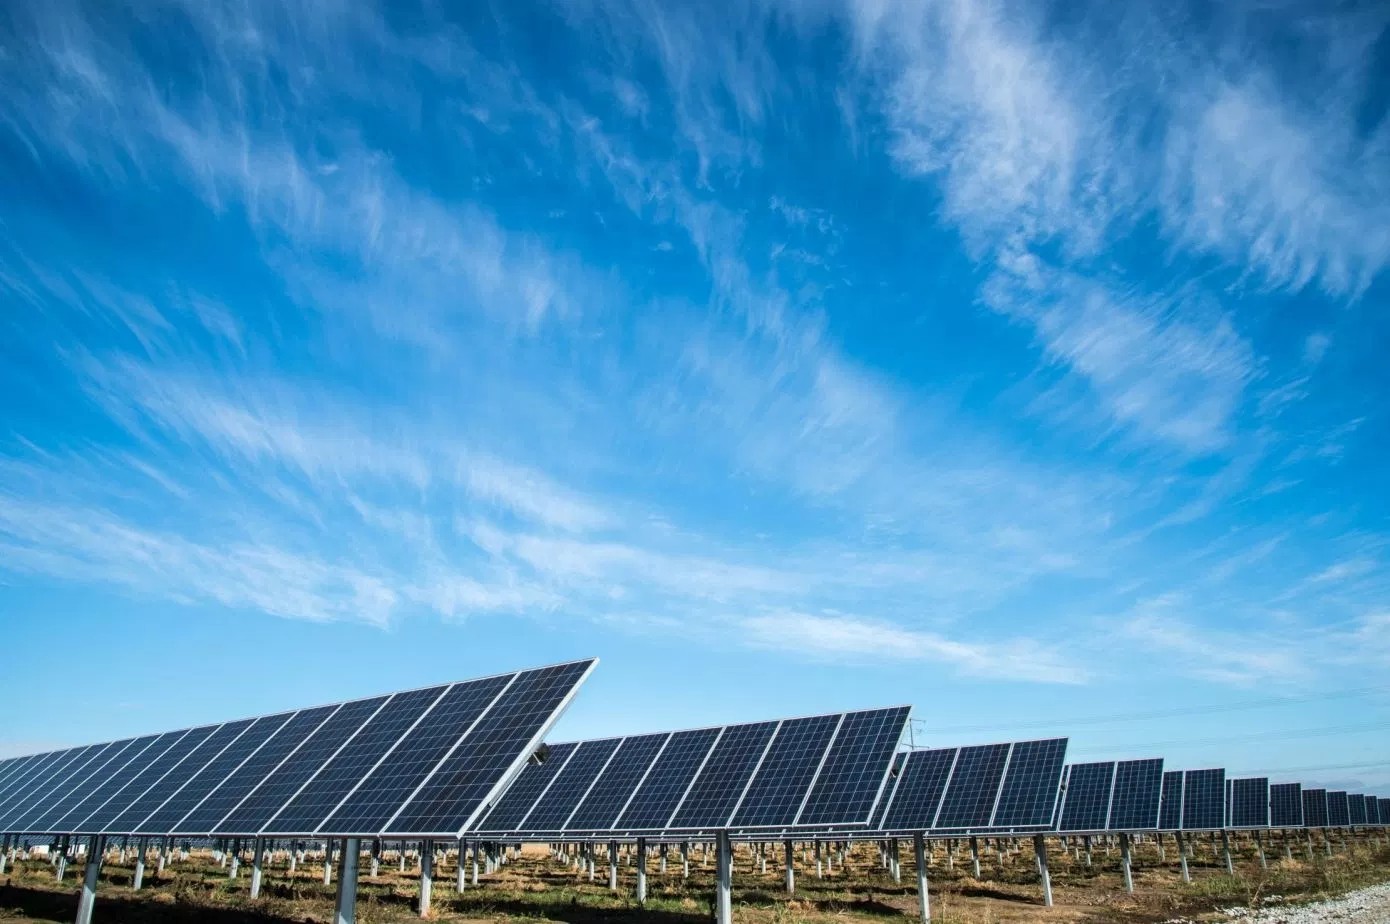 A new solar technology could be the next big boost for renewable energy